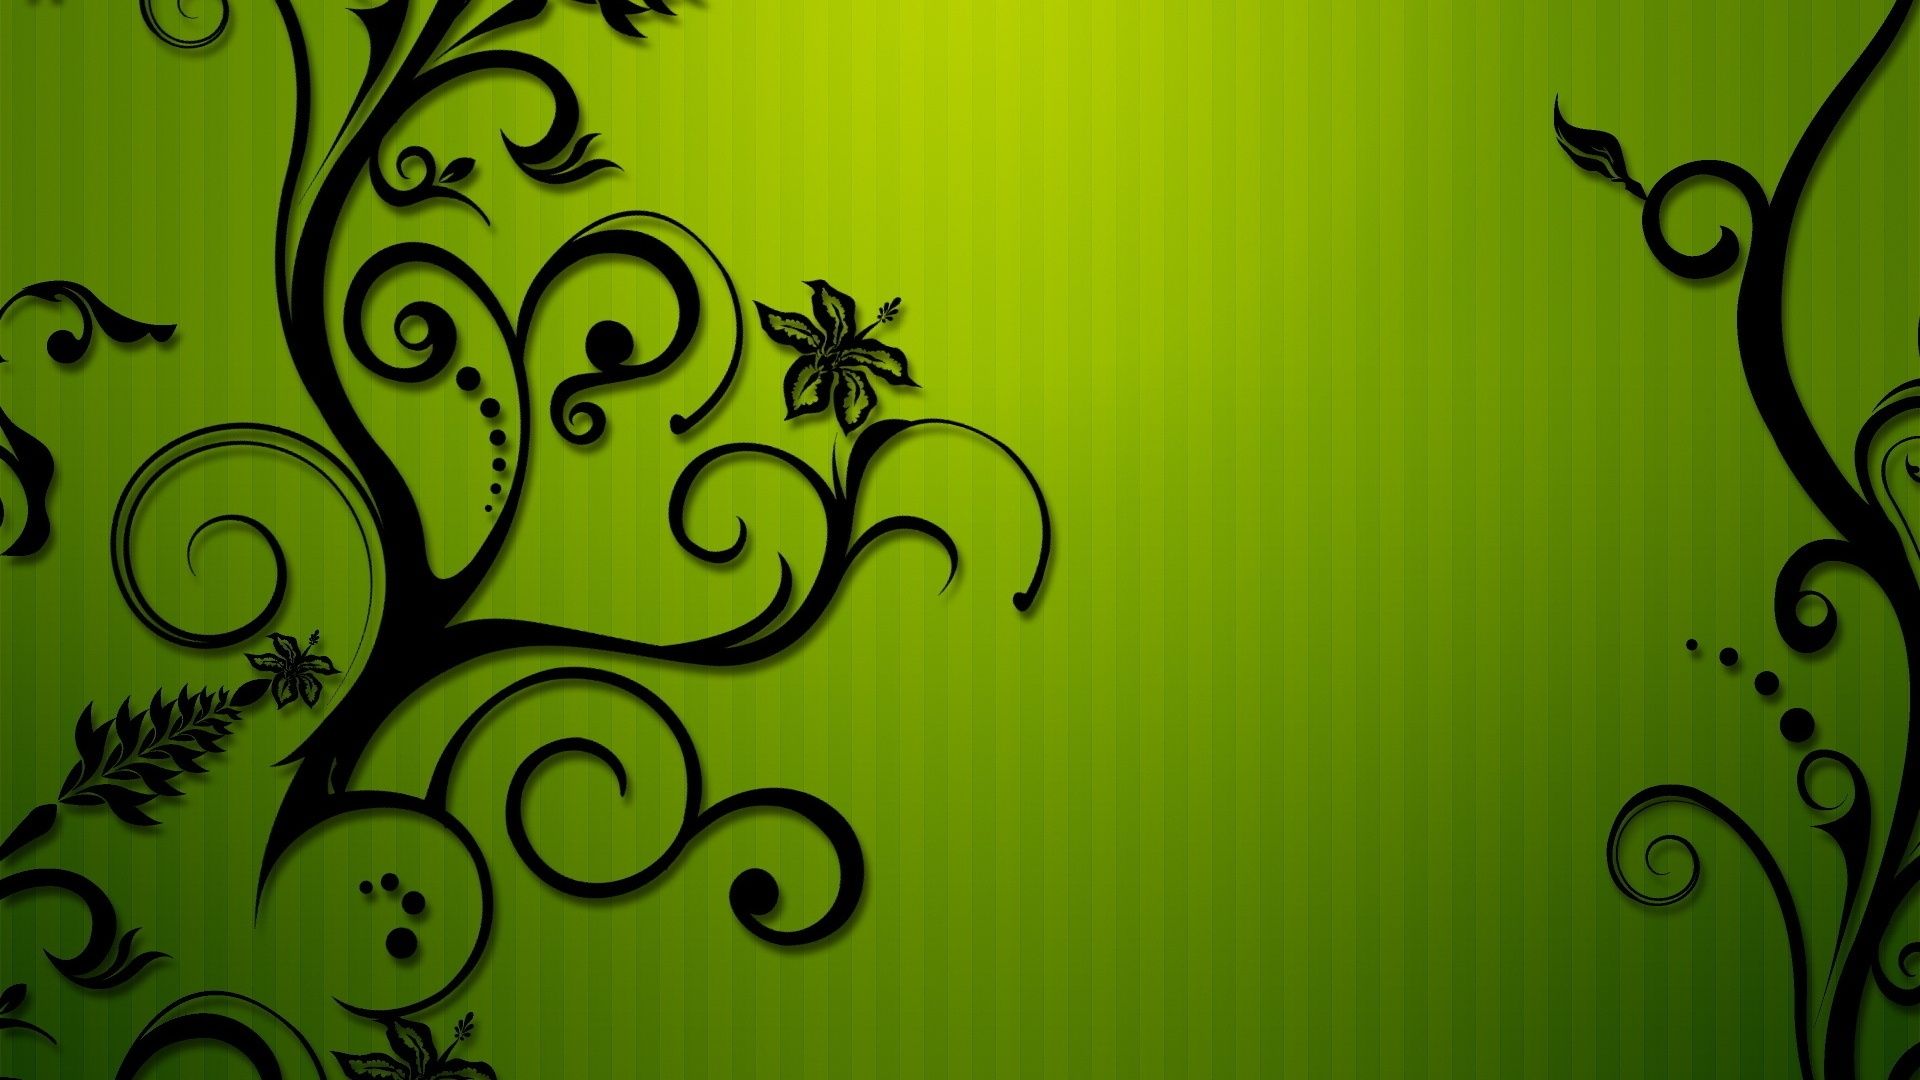 Hd wallpaper Graphic string - Background Wallpapers for your